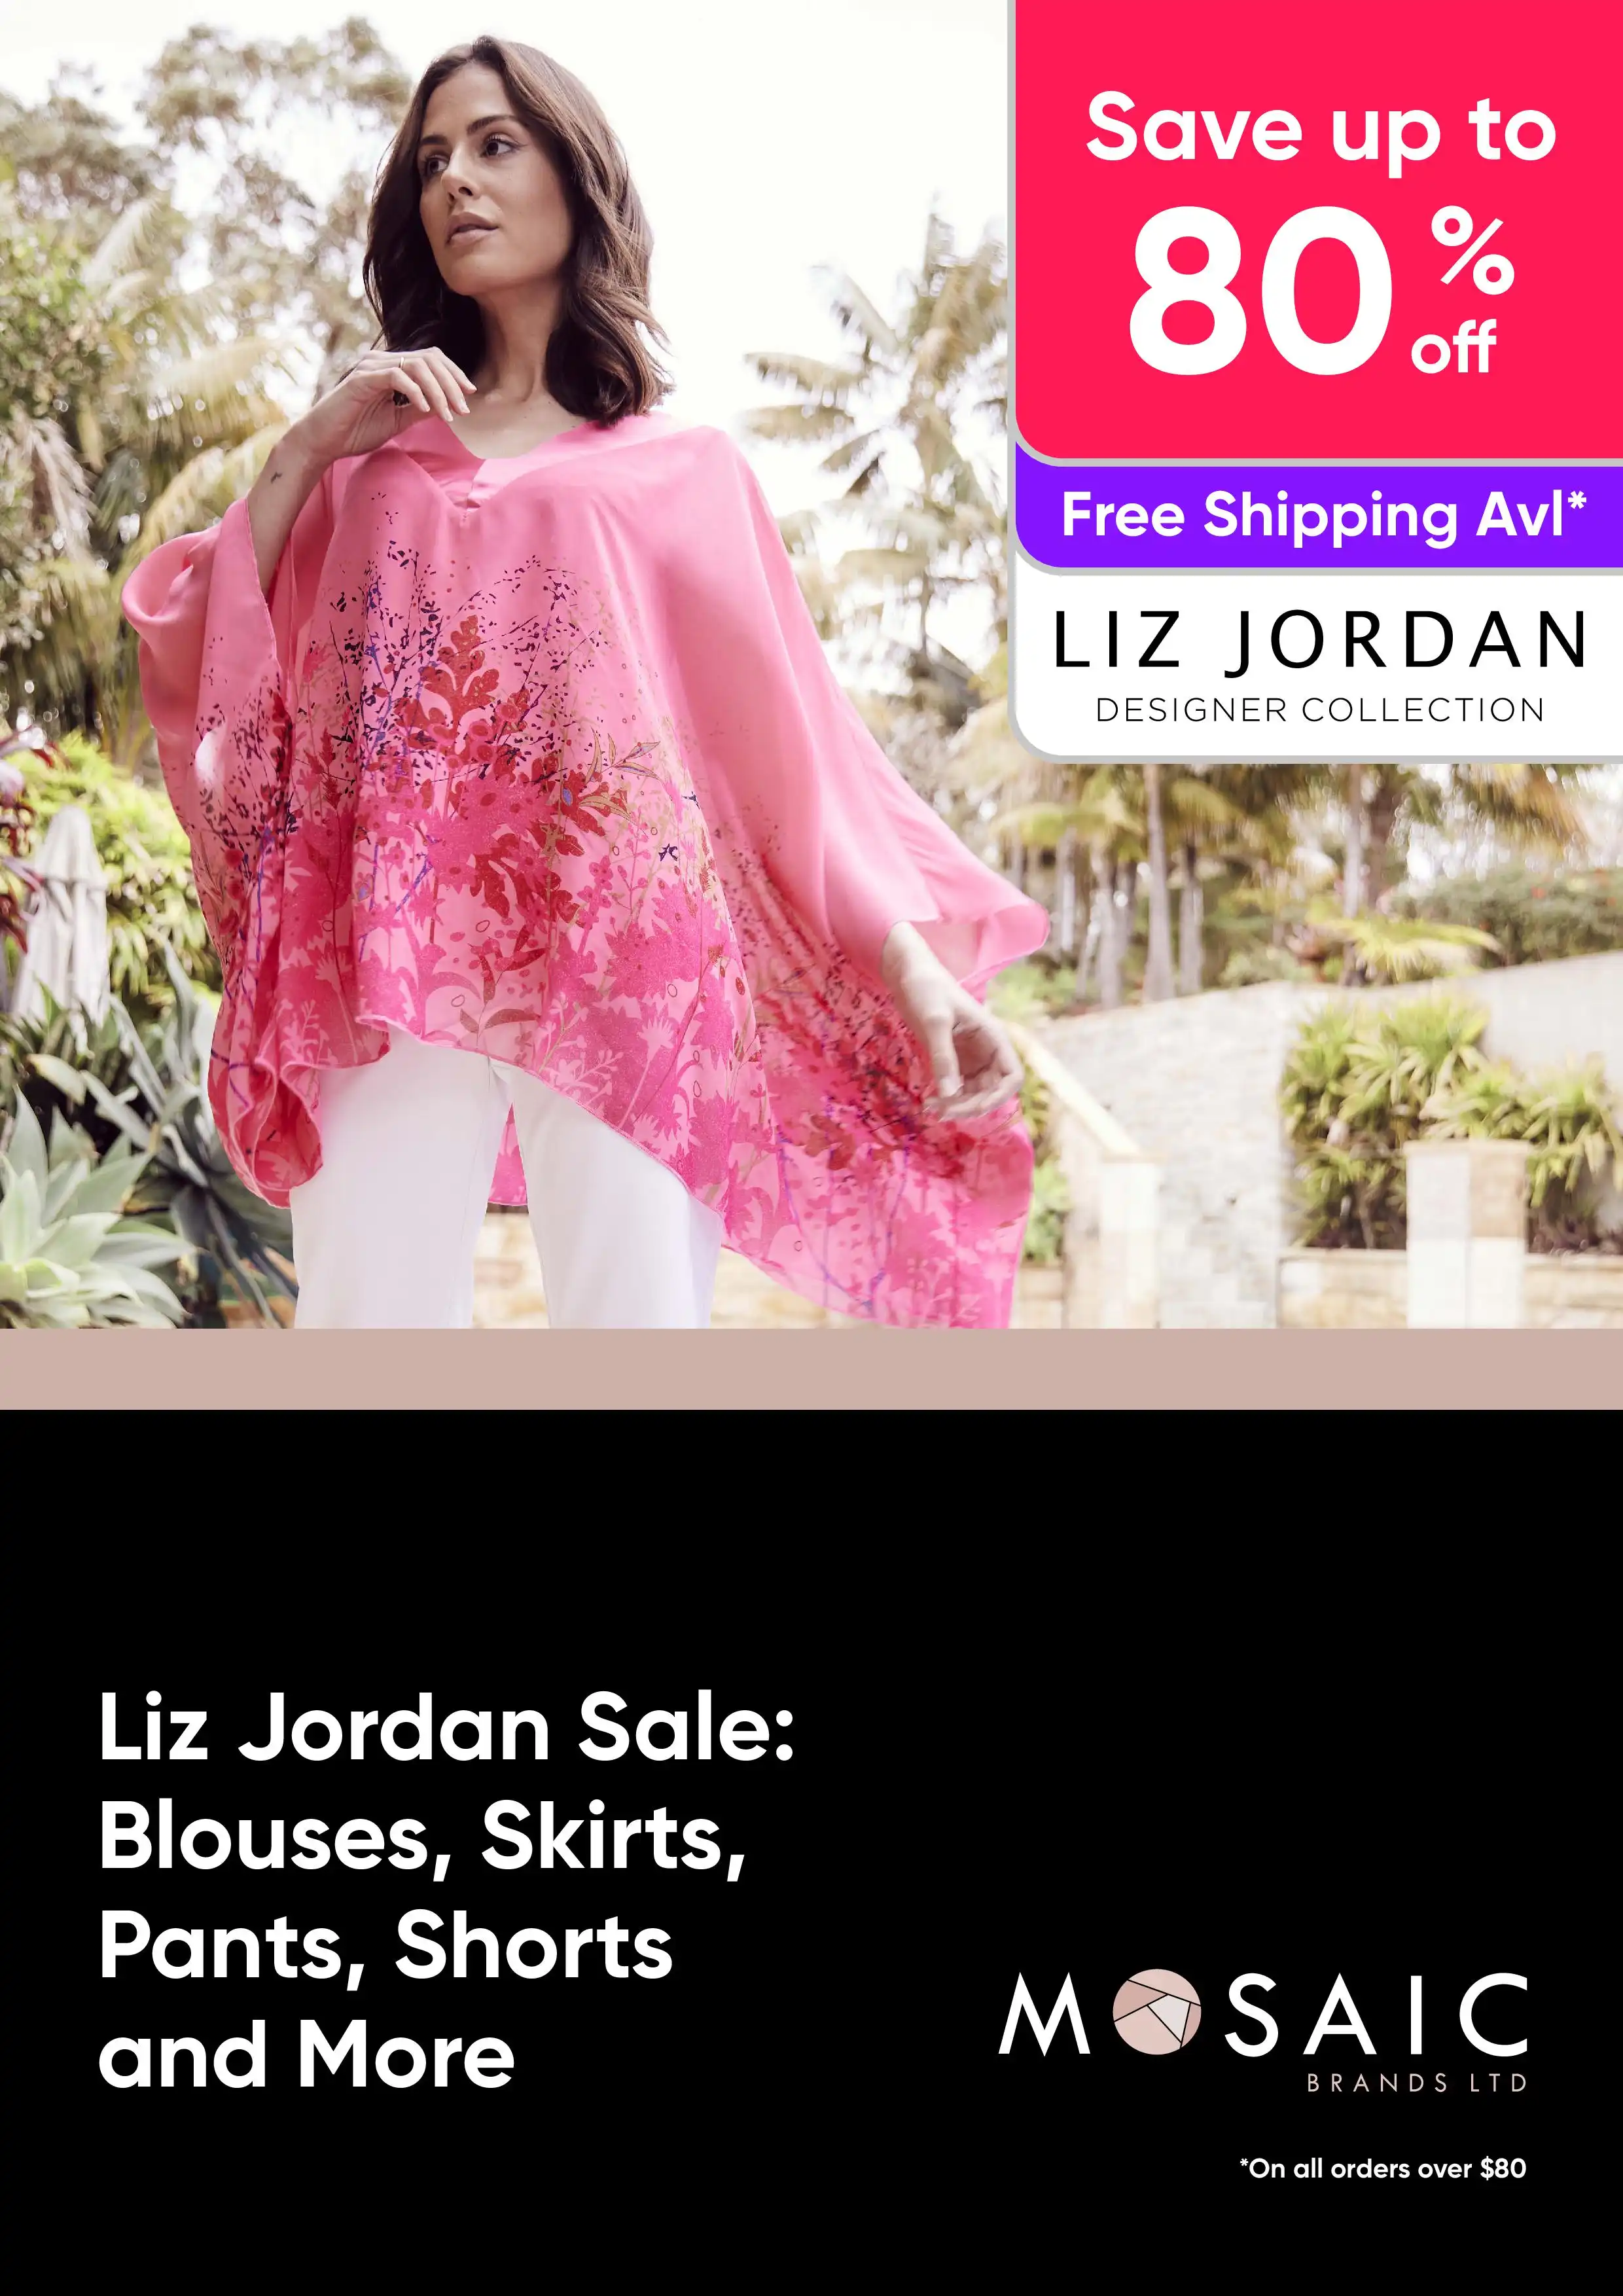 Liz Jordan Sale - Blouses, Skirts, Pants, Shorts and More - up to 80% off